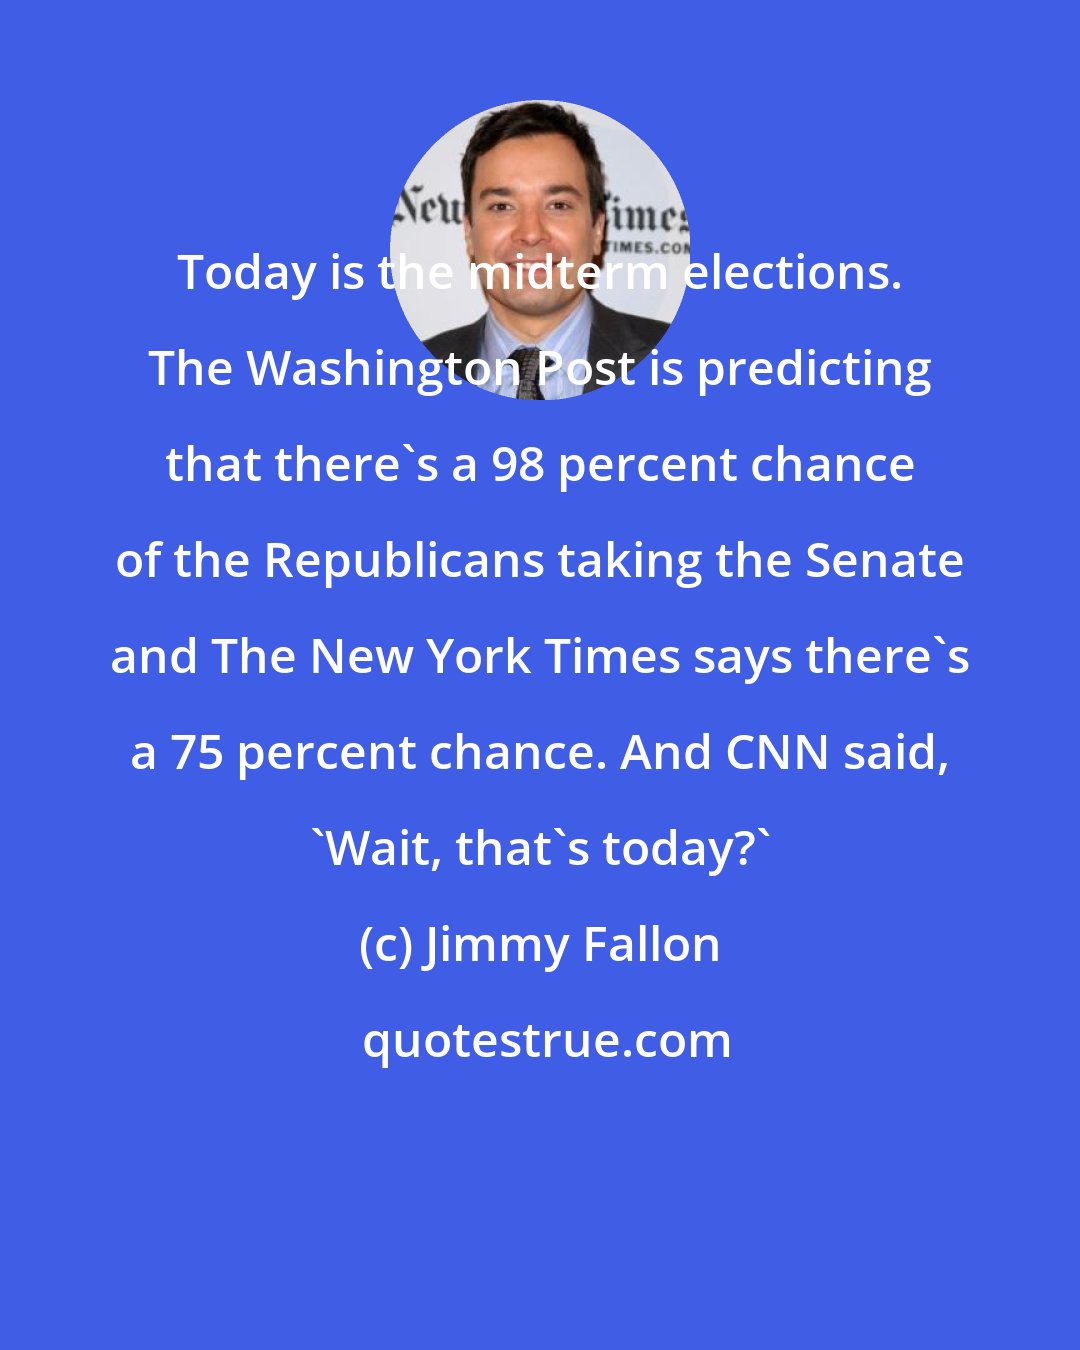 Jimmy Fallon: Today is the midterm elections. The Washington Post is predicting that there's a 98 percent chance of the Republicans taking the Senate and The New York Times says there's a 75 percent chance. And CNN said, 'Wait, that's today?'